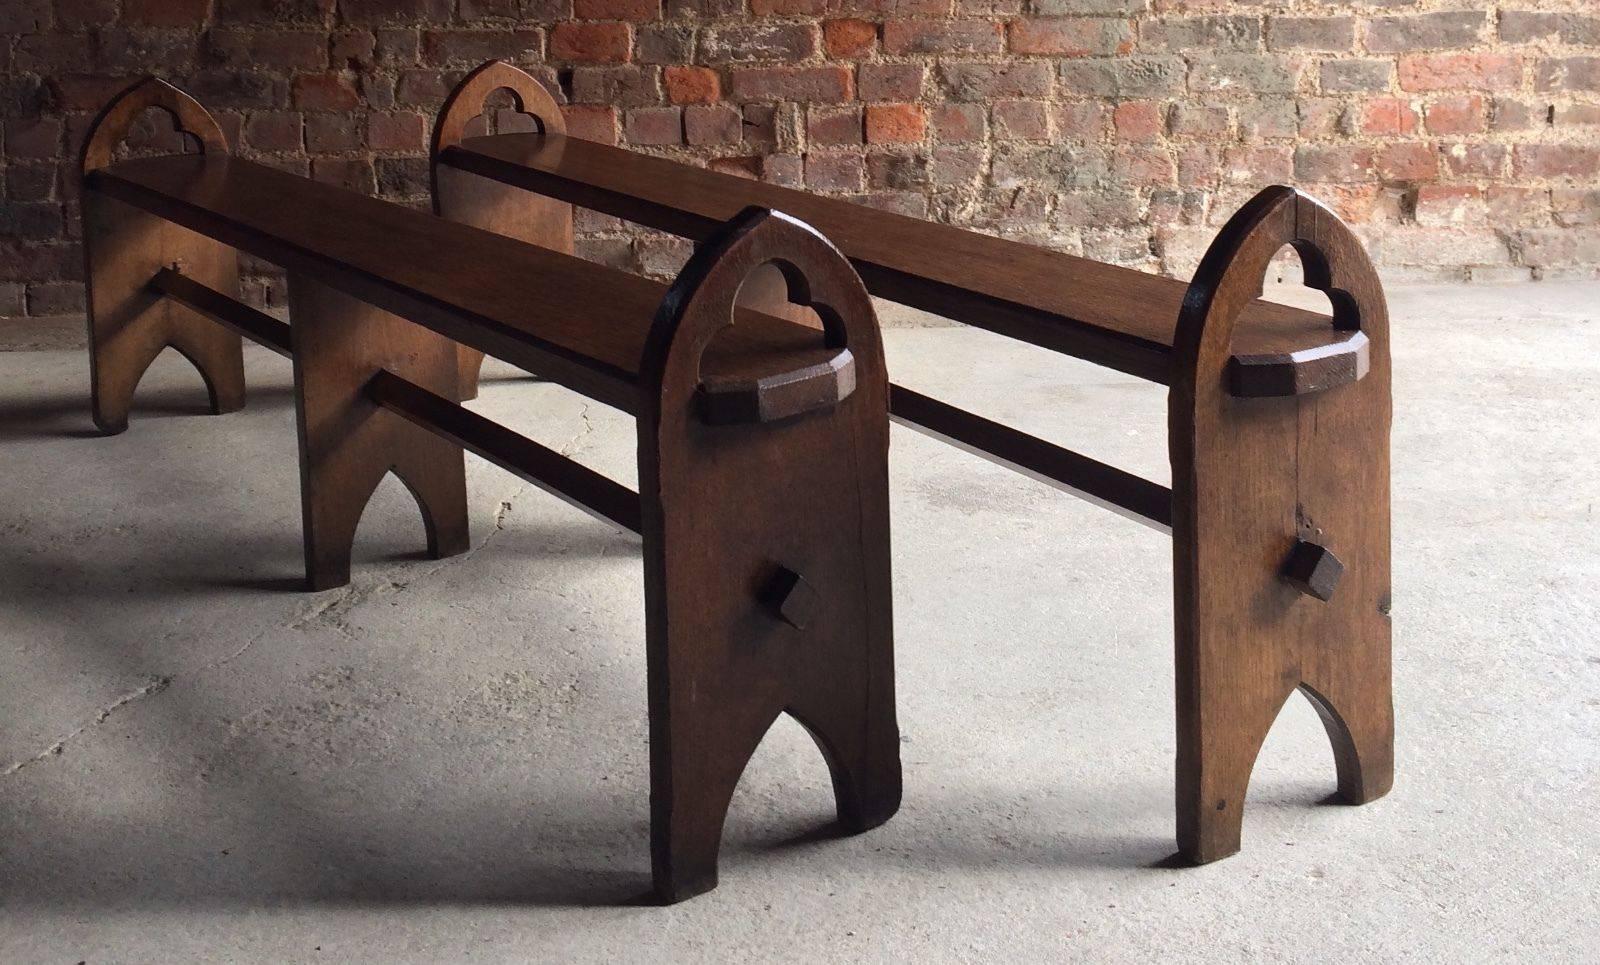 A truly magnificent Victorian pair of Pugin style Gothic solid oak bench seats, circa 1870 with pierced arch end standards and central stretcher, wonderful aged patina to the oak and offered in excellent condition.